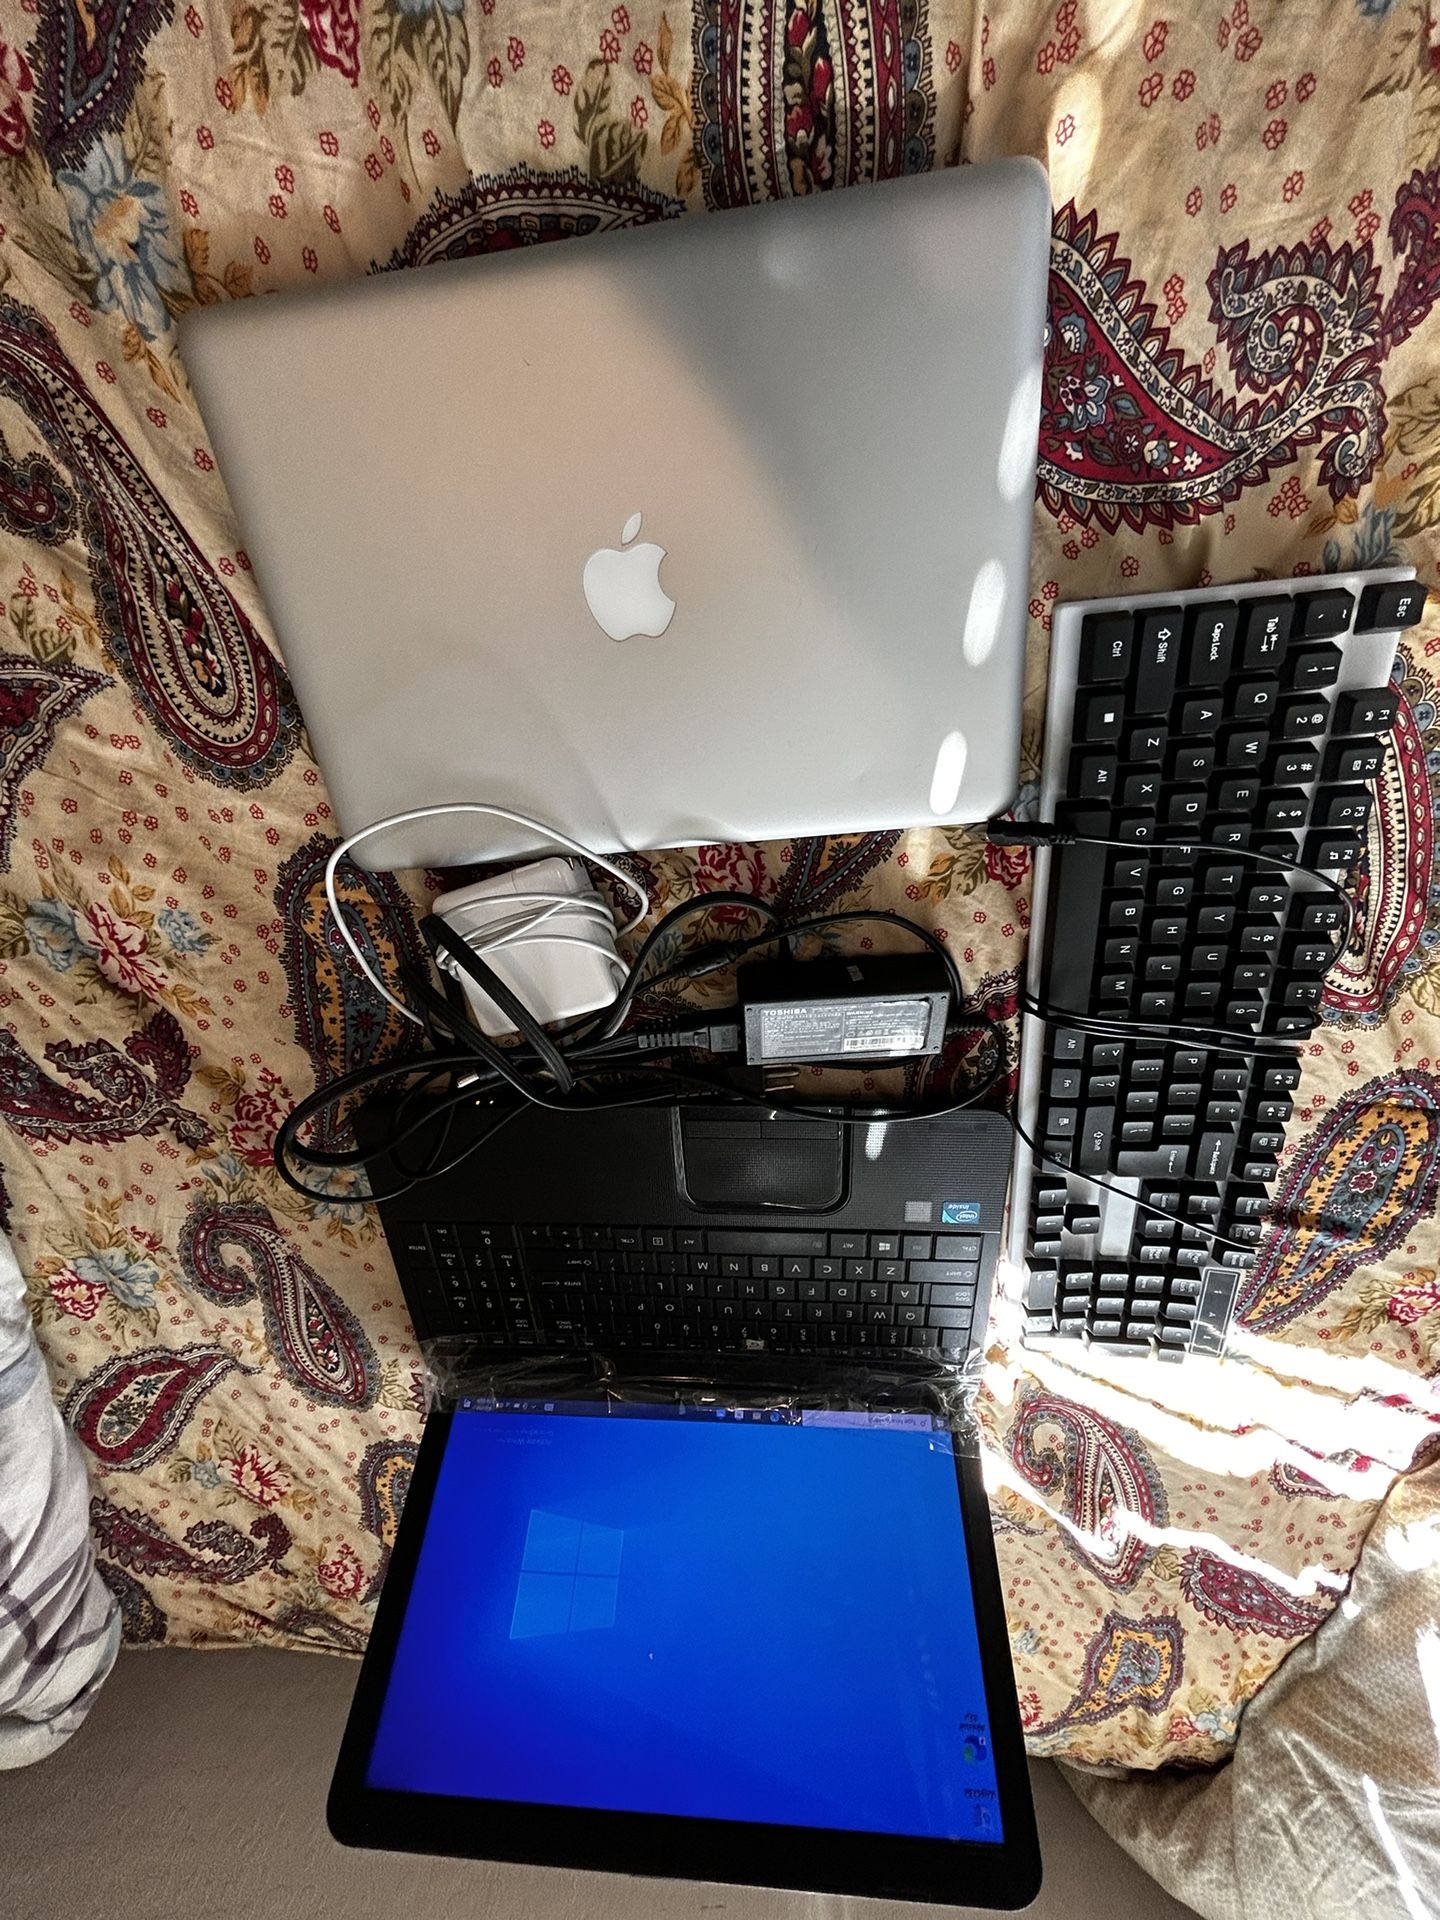 MacBook Pro 2012, Toshiba laptop, keyboard and chargers for both Mac and windows